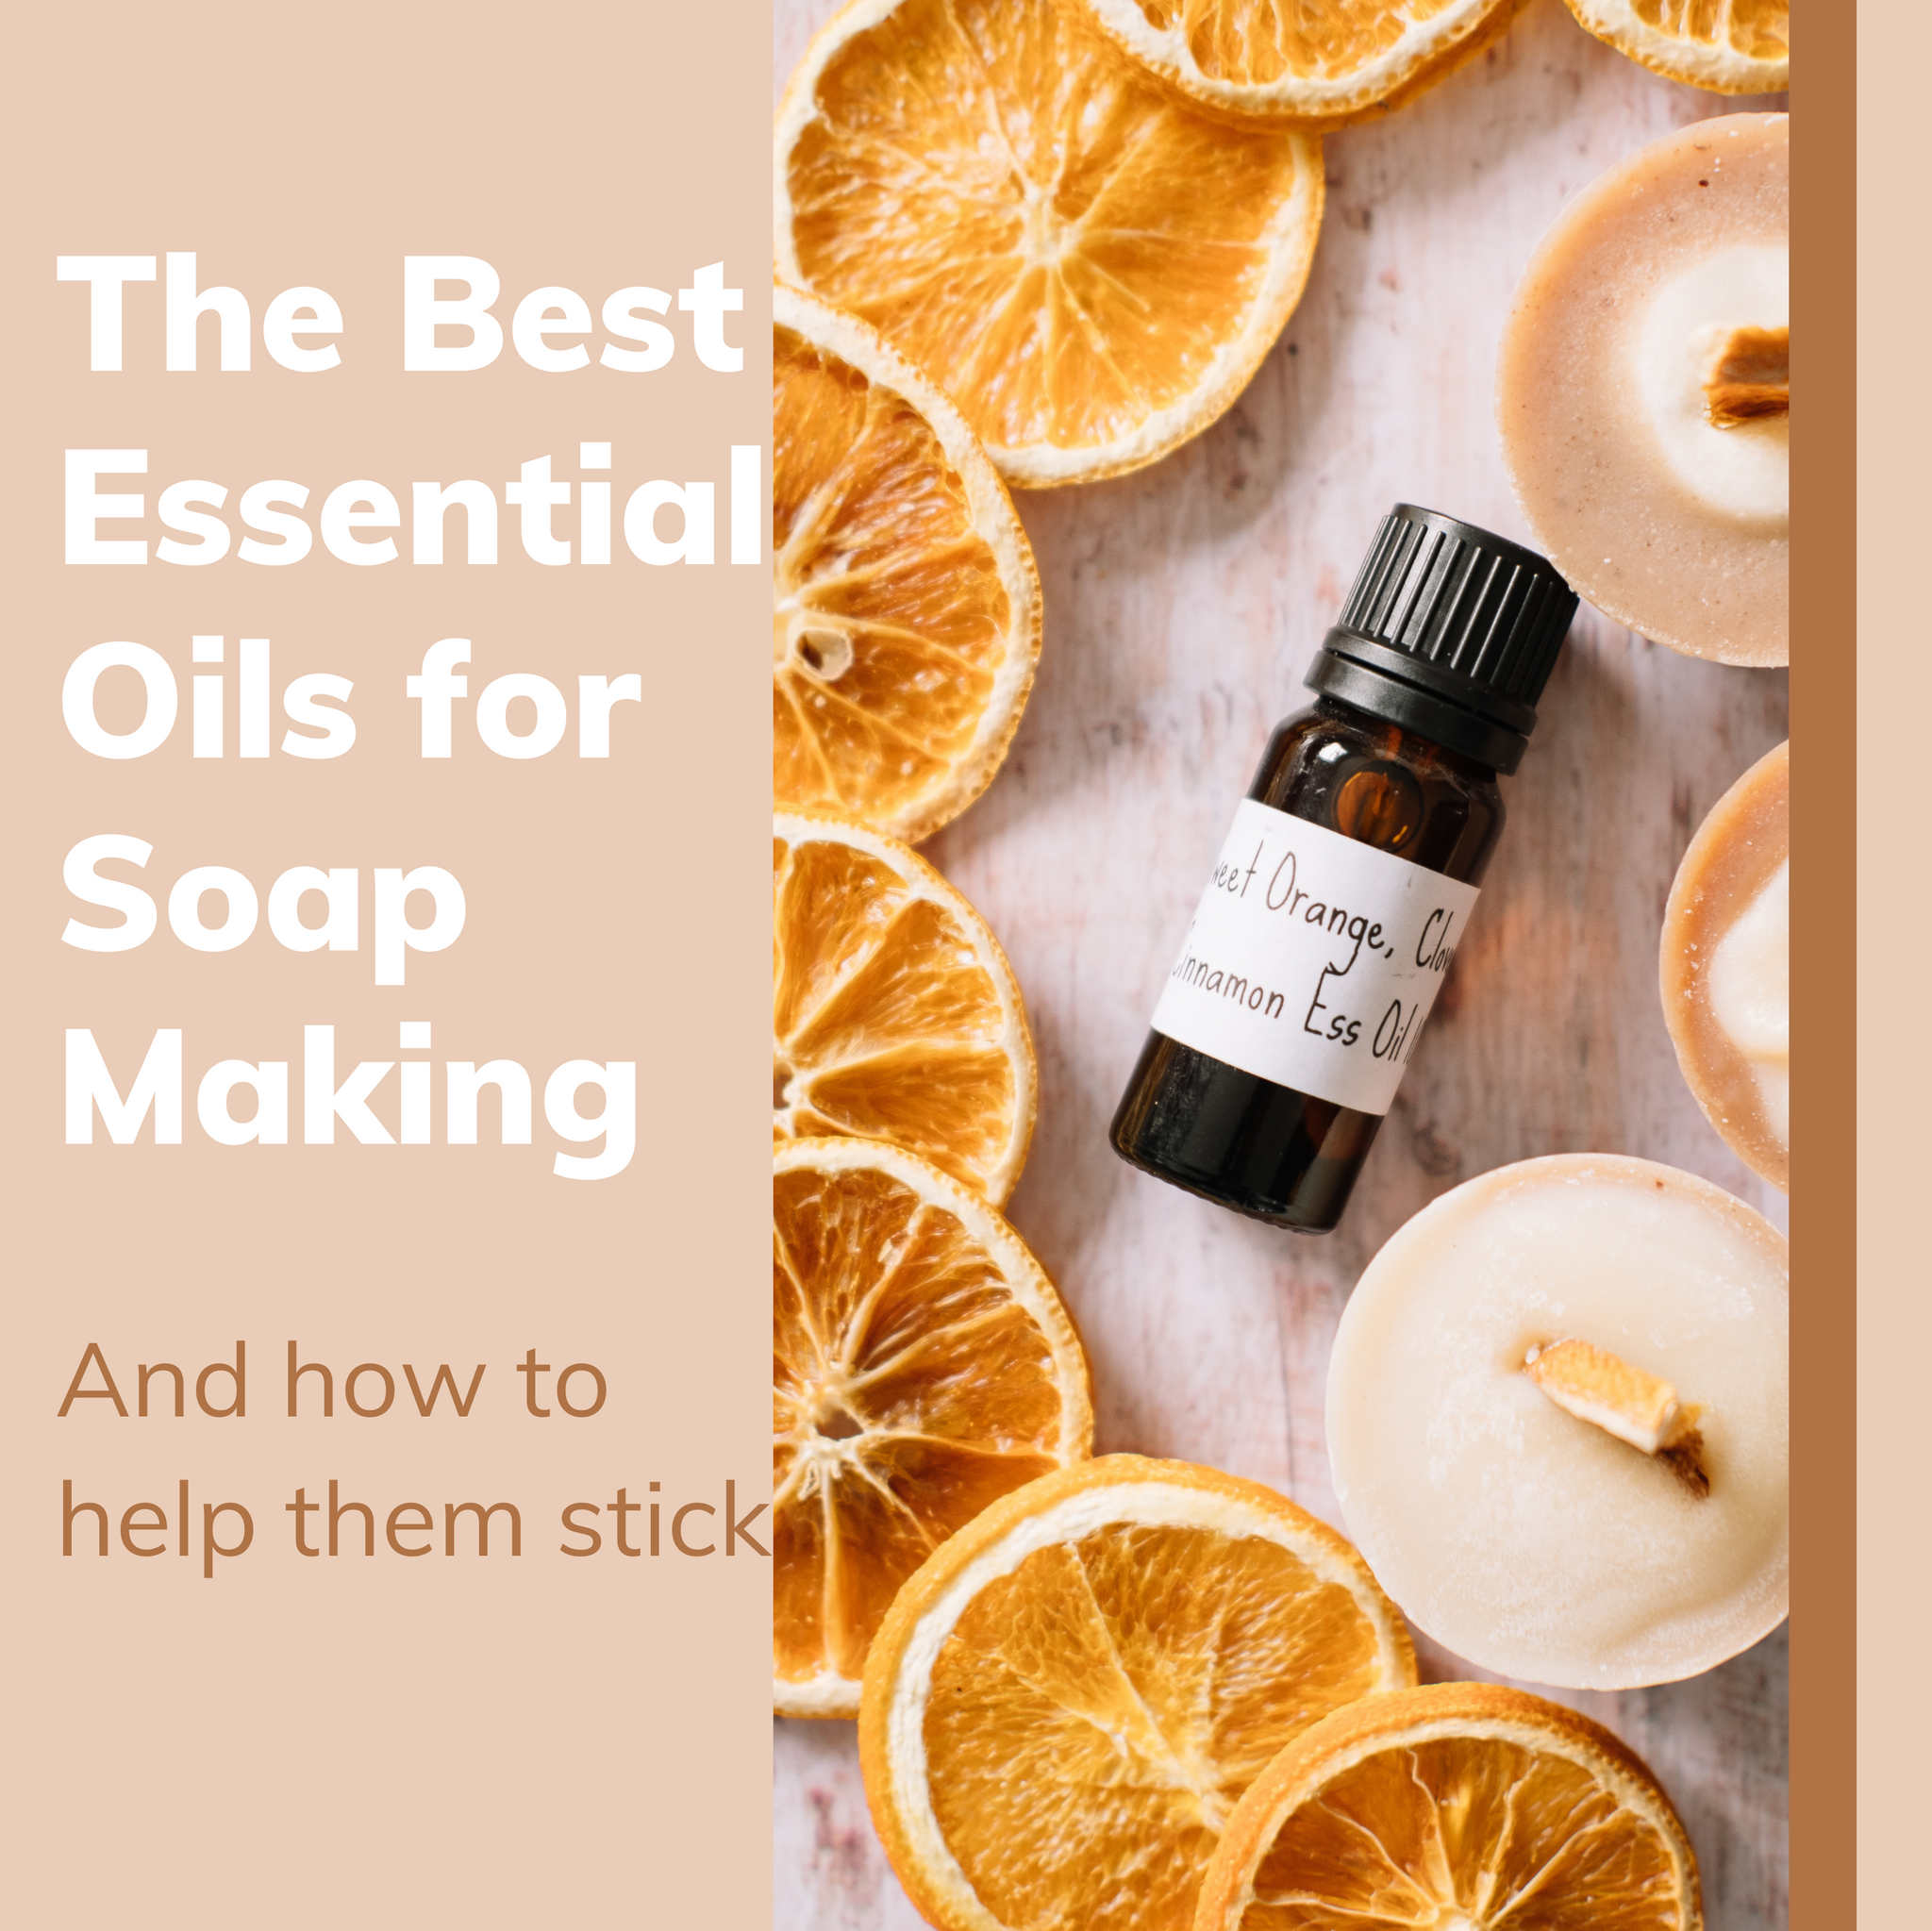 The Best Essential for Soap Making and to Help 'Stick' - The Soap Coach